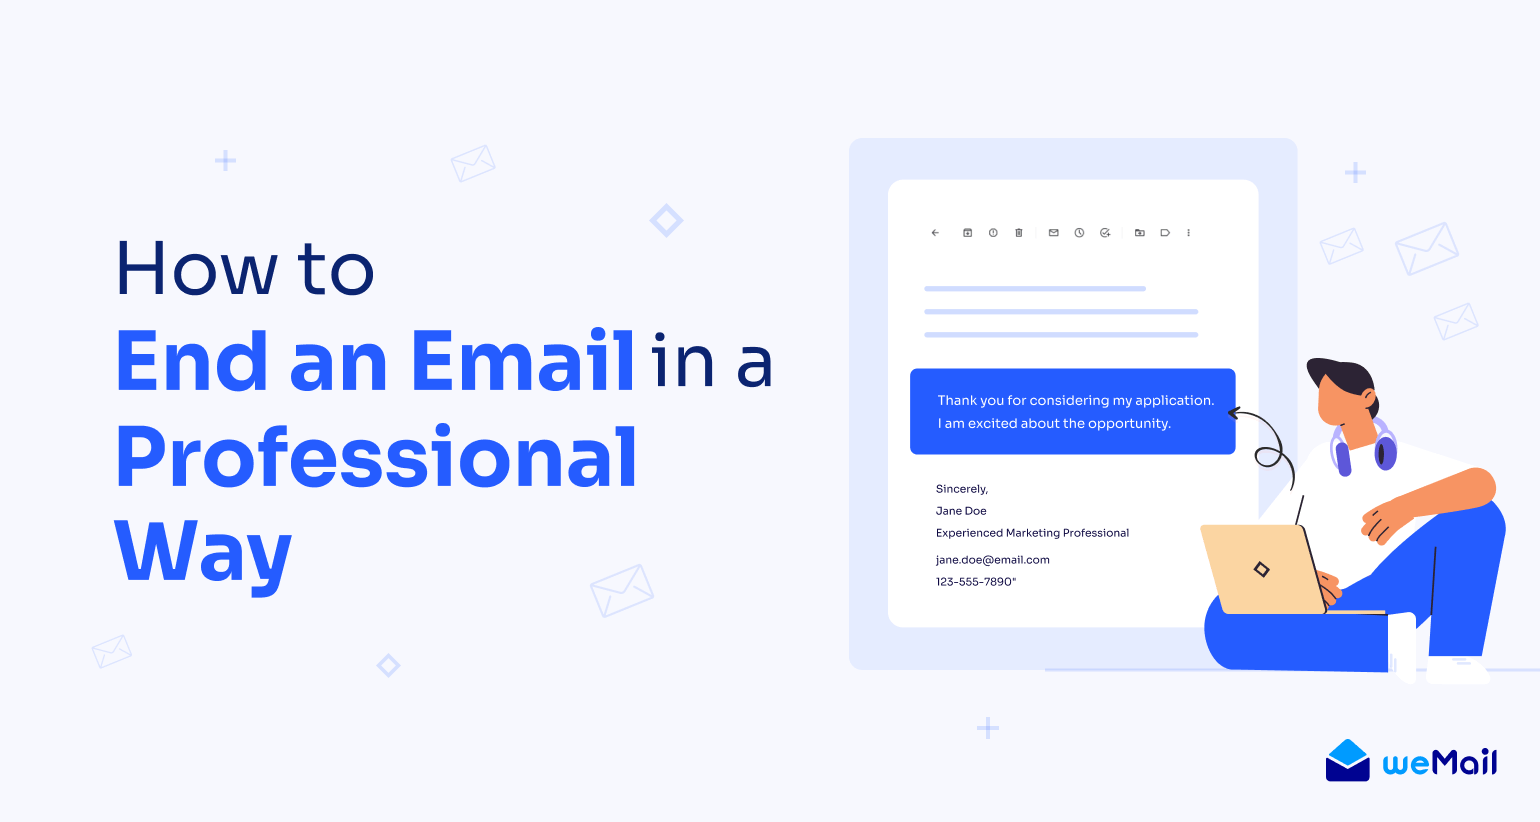 How to End an Email in a Professional Way